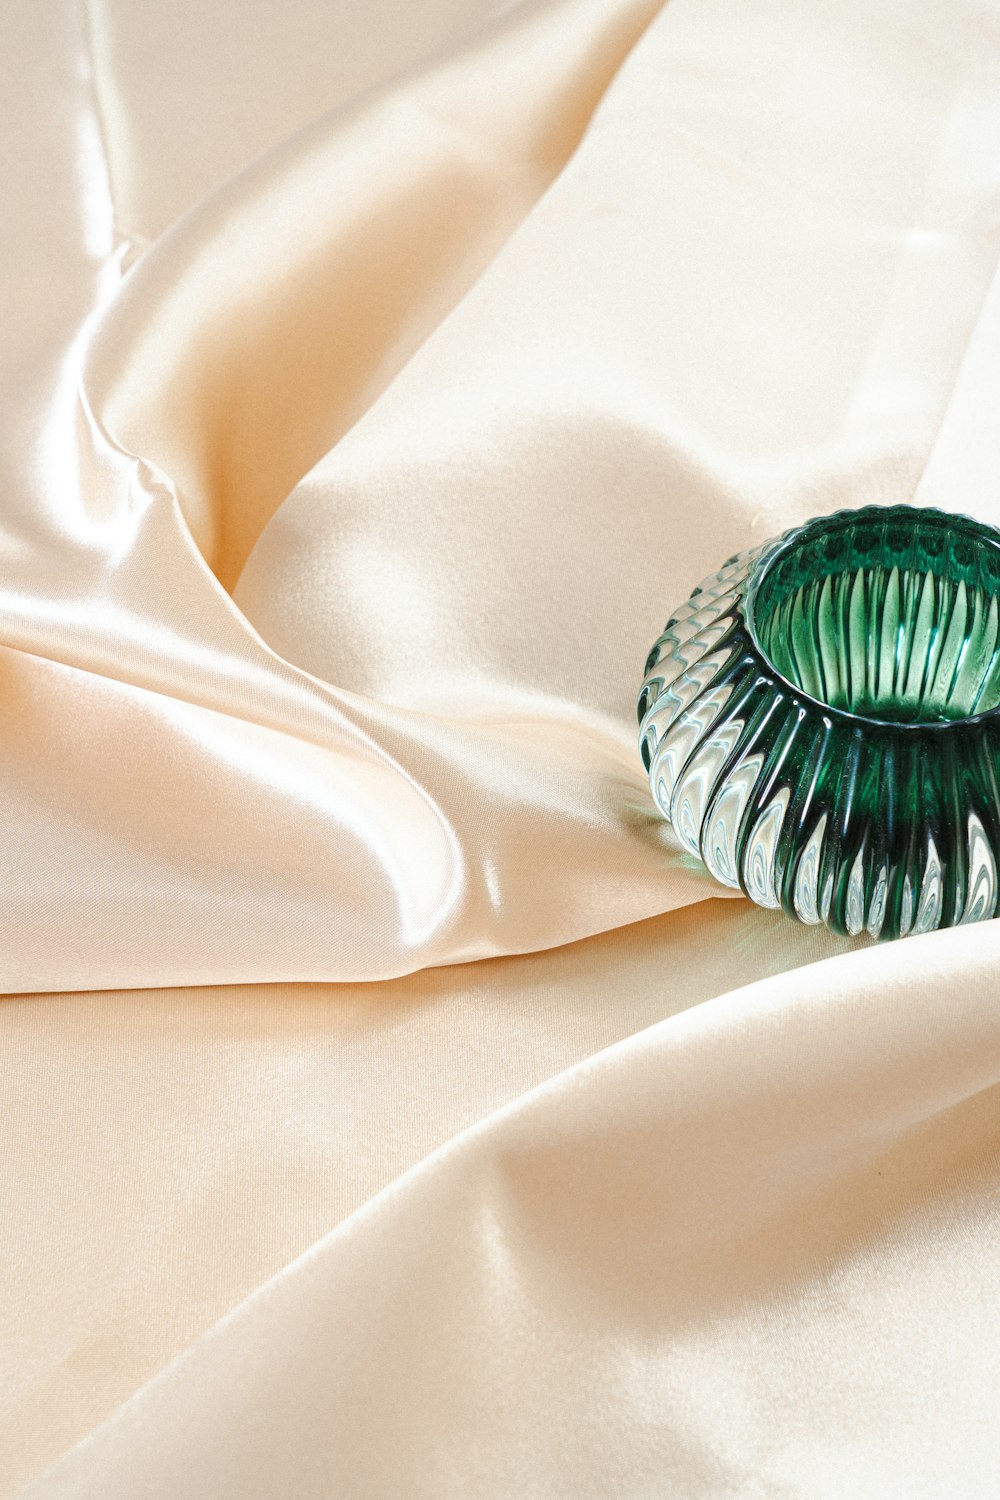 green and silver round accessory